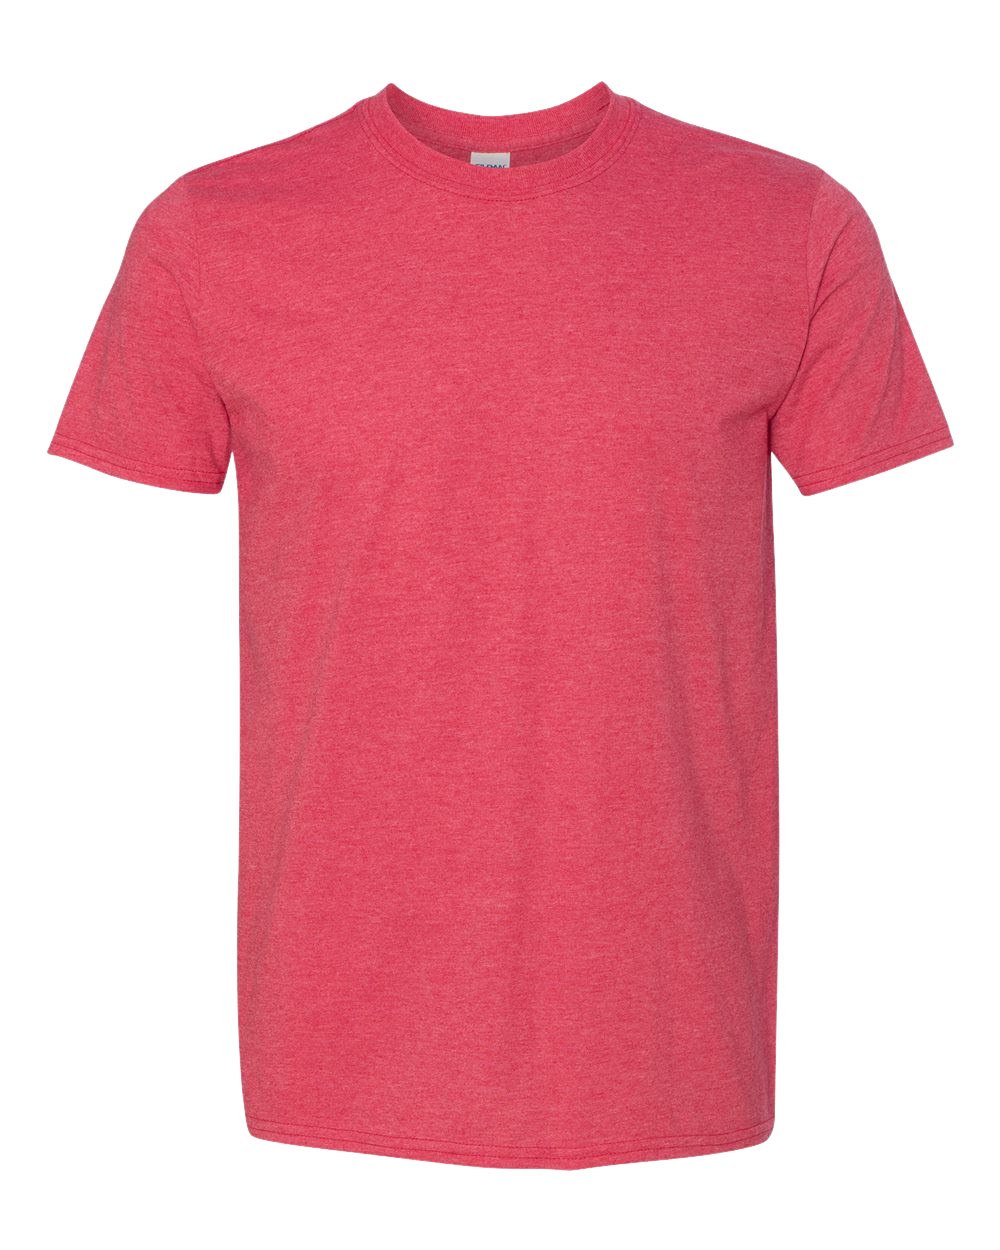 Sample of Red T-shirt  (Gildan softstyle may be substituted for Hanes if supply runs low)